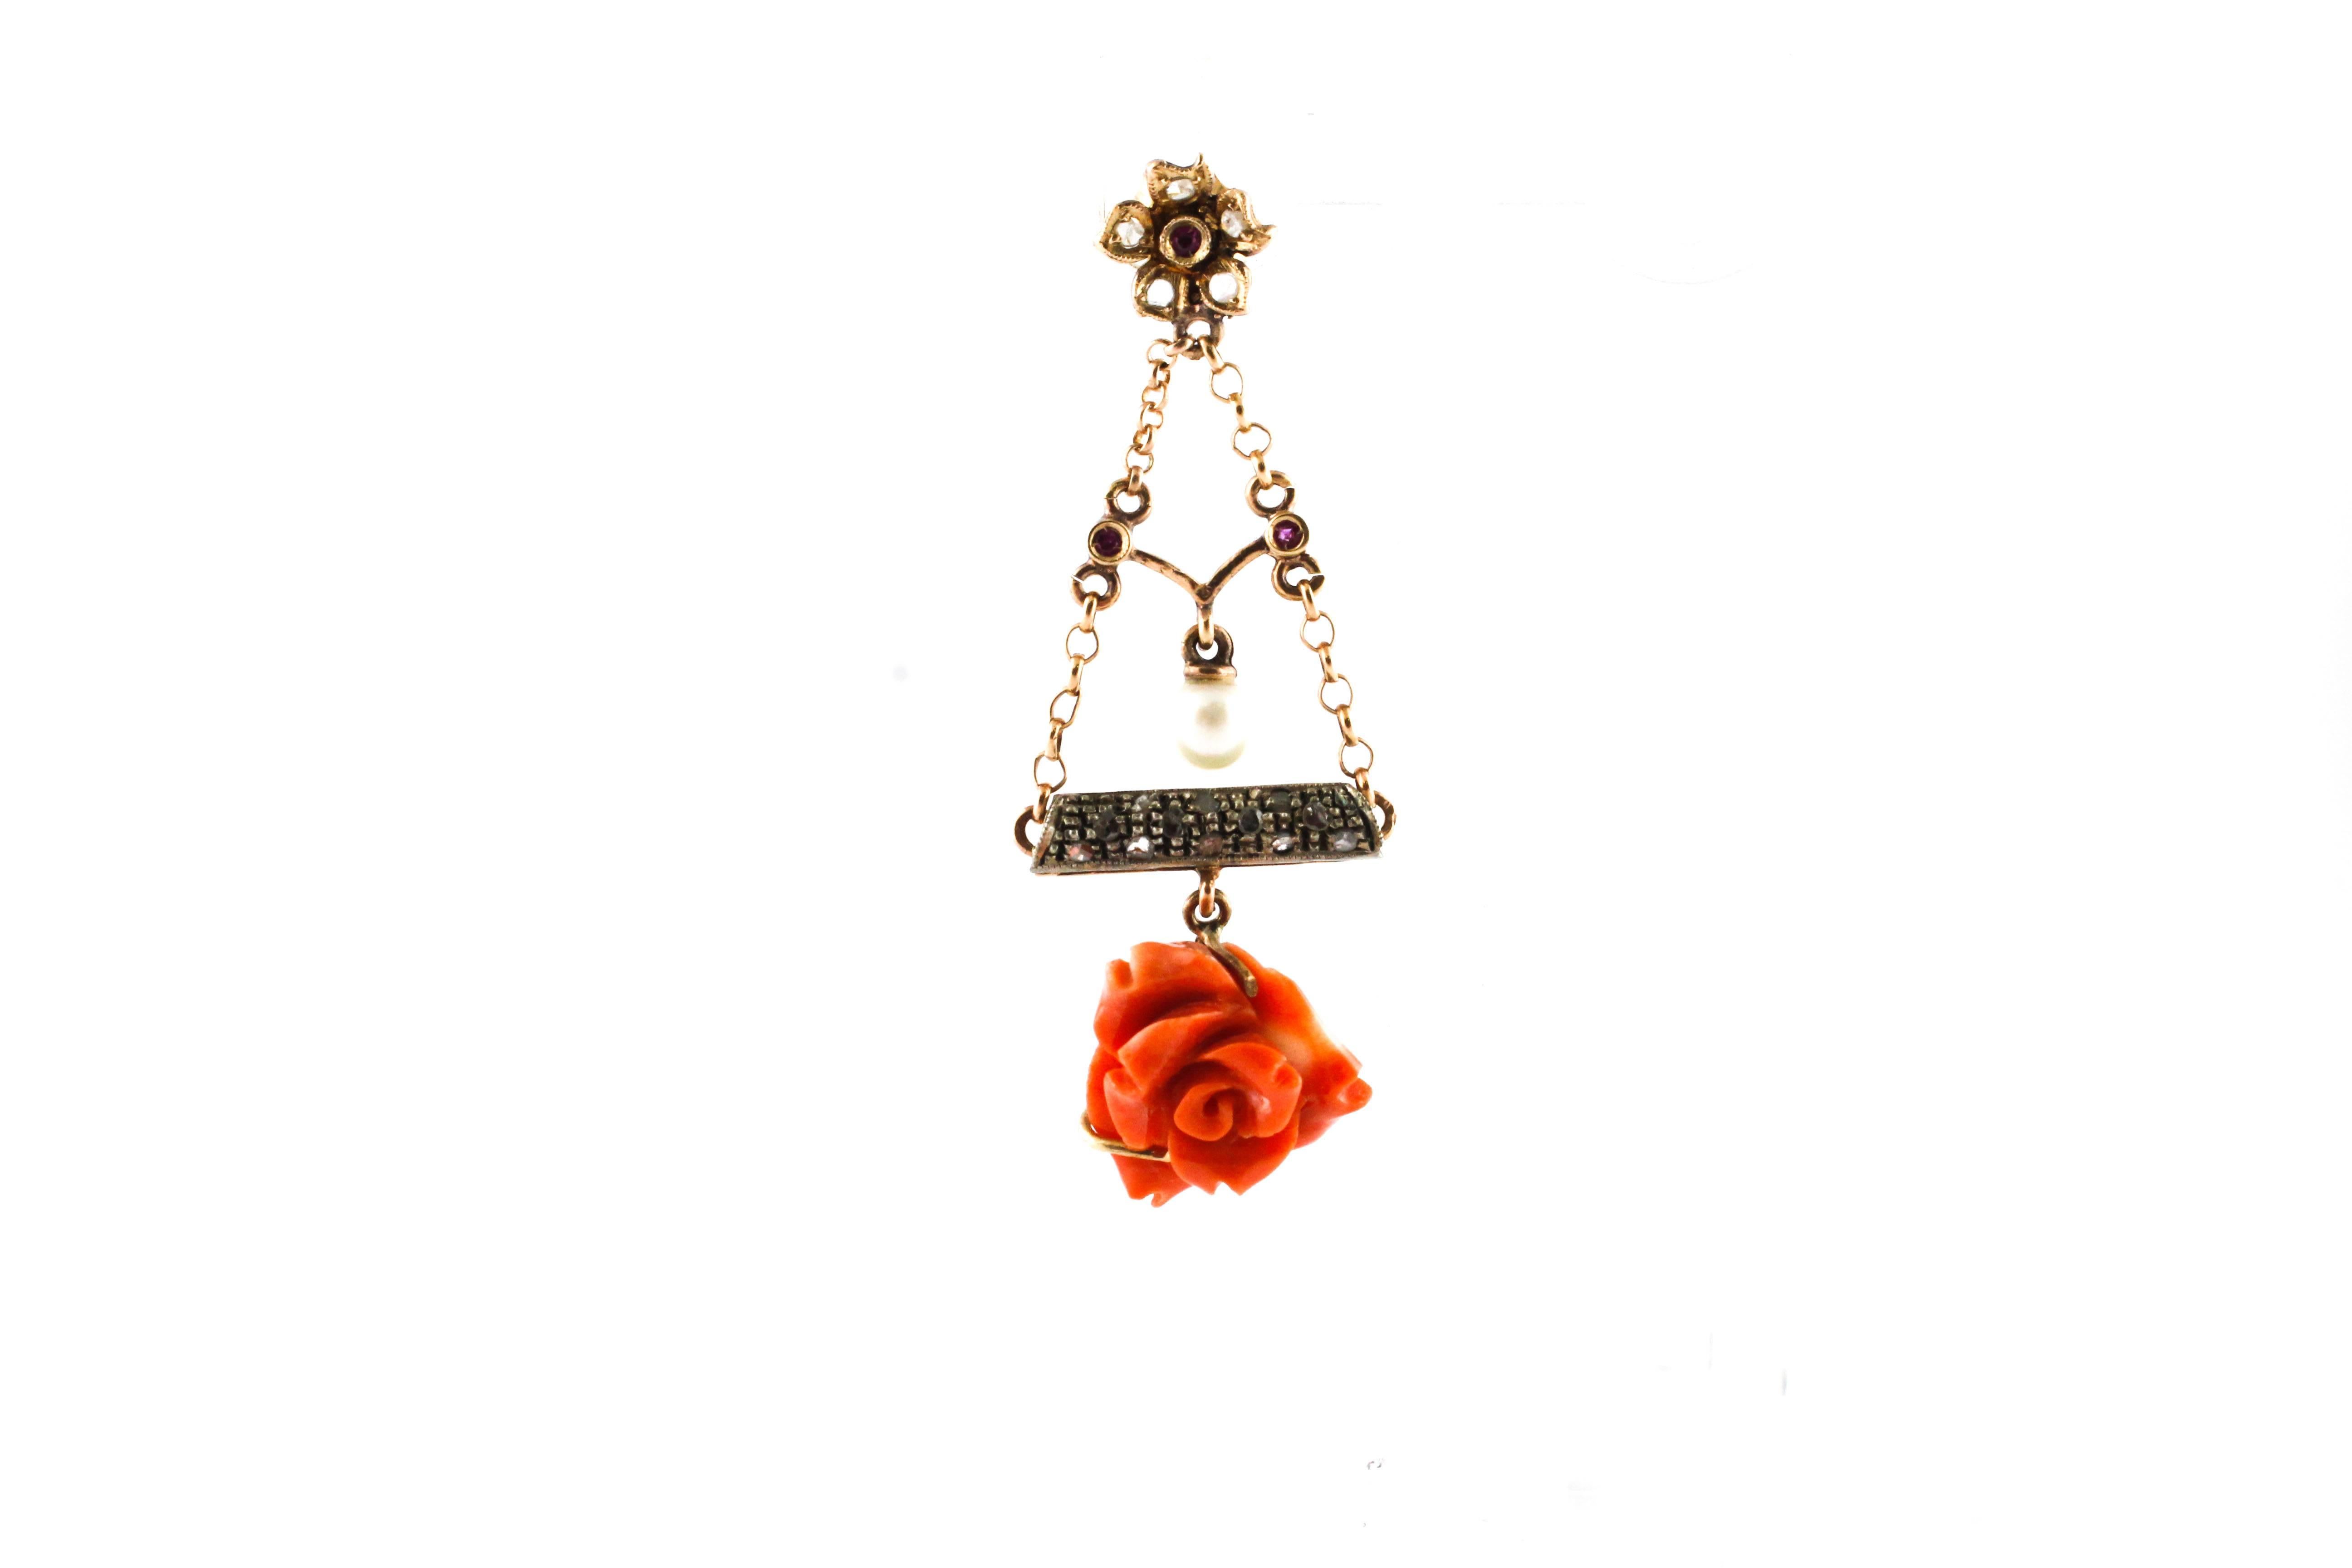 Retro Red Coral Flowers, Diamonds, Pearls, Rubies, Rose Gold and Silver Flower Earrings